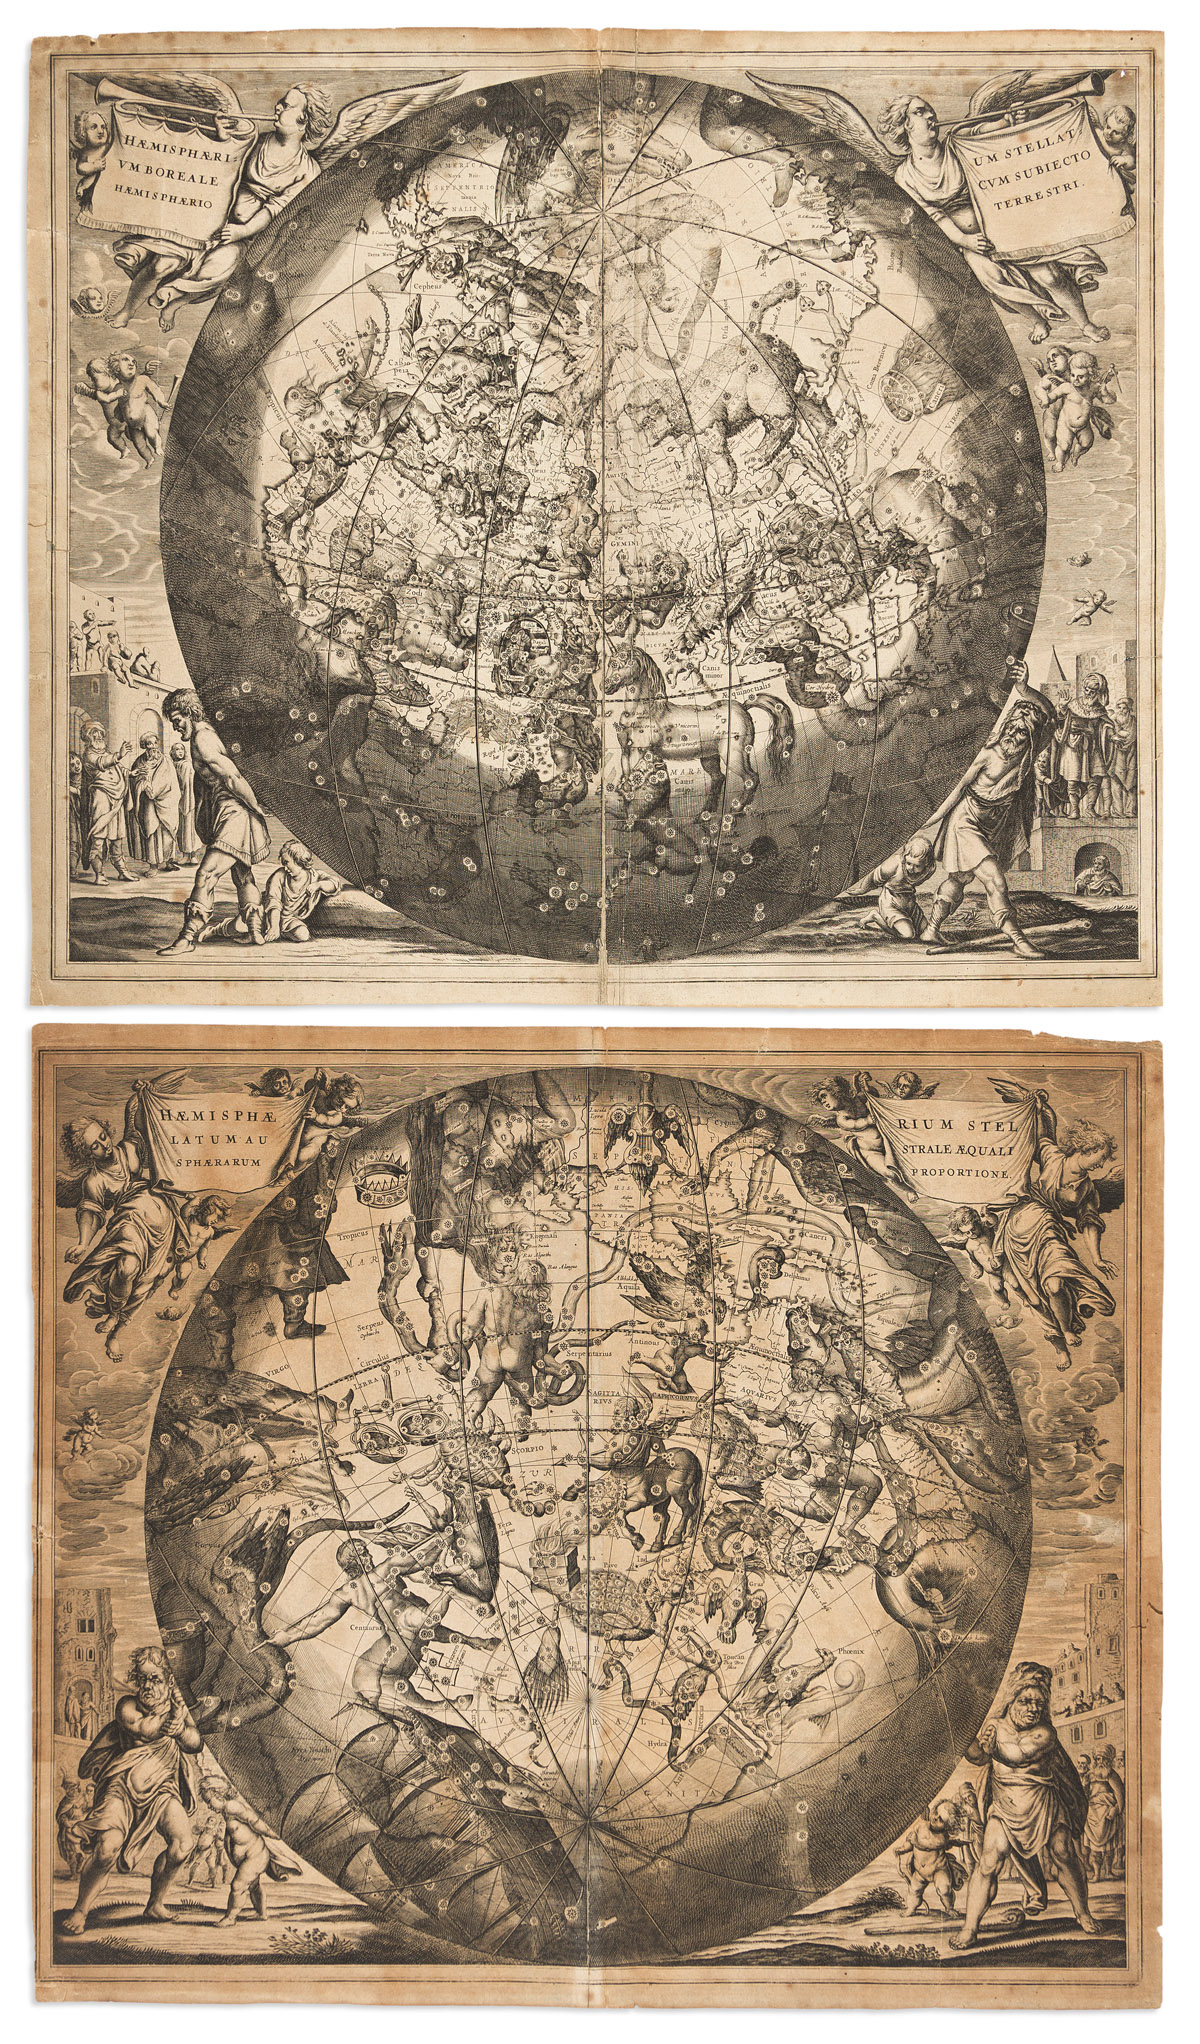 (CELESTIAL.) Andreas Cellarius. 2 double-page engraved celestial charts from Harmonia Macrocosmica.